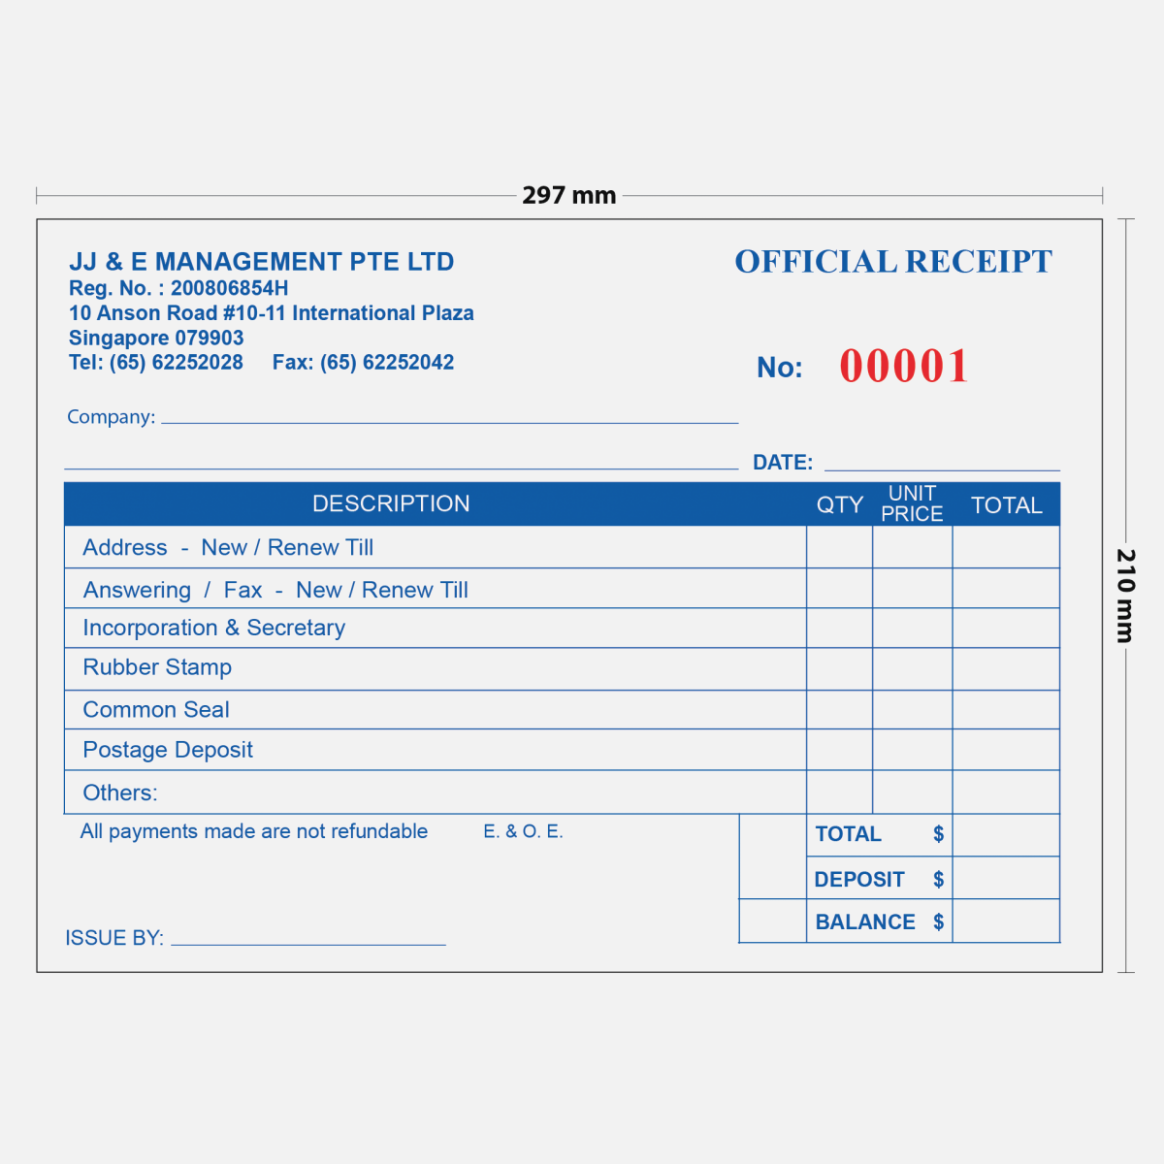 41 Free Tax Invoice Book Template PSD File by Tax Invoice Book Template